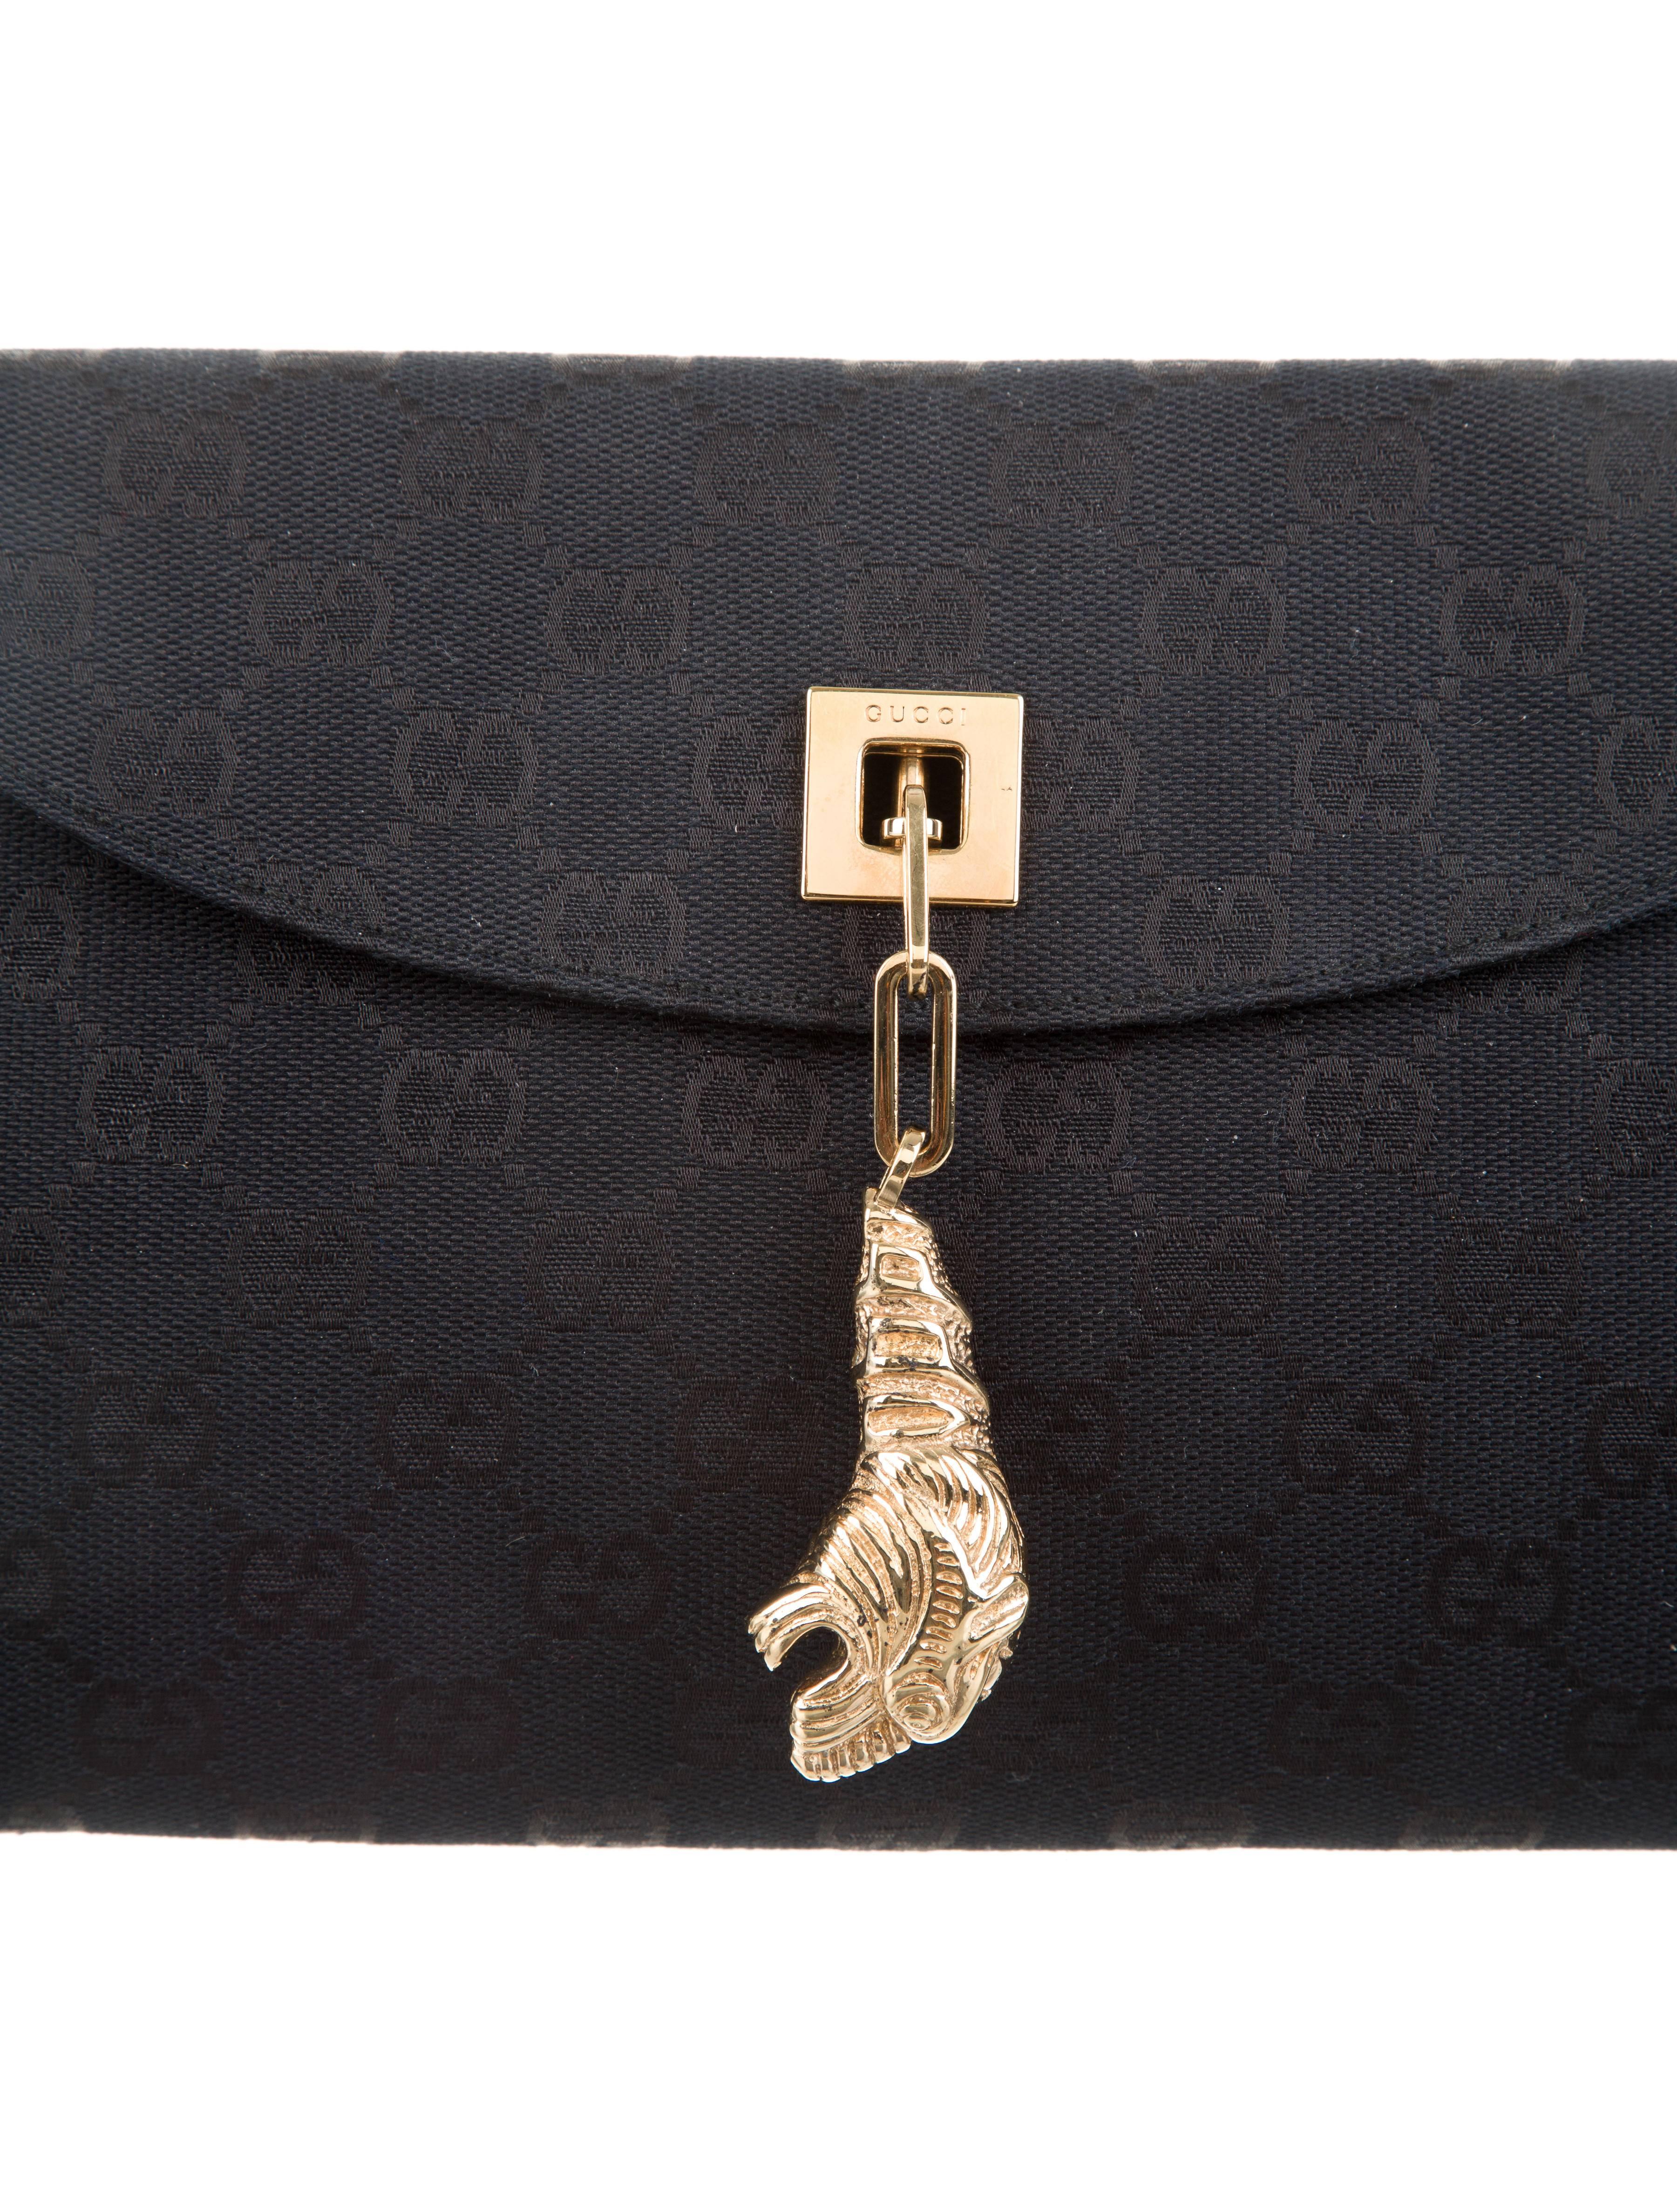 CURATOR'S NOTES

If you are a lover of Tom Ford, don't miss your opportunity to own a piece of fashion history with this chic shoulder bag.

Monogram canvas 
Gold hardware
Flap closure
Measures 13